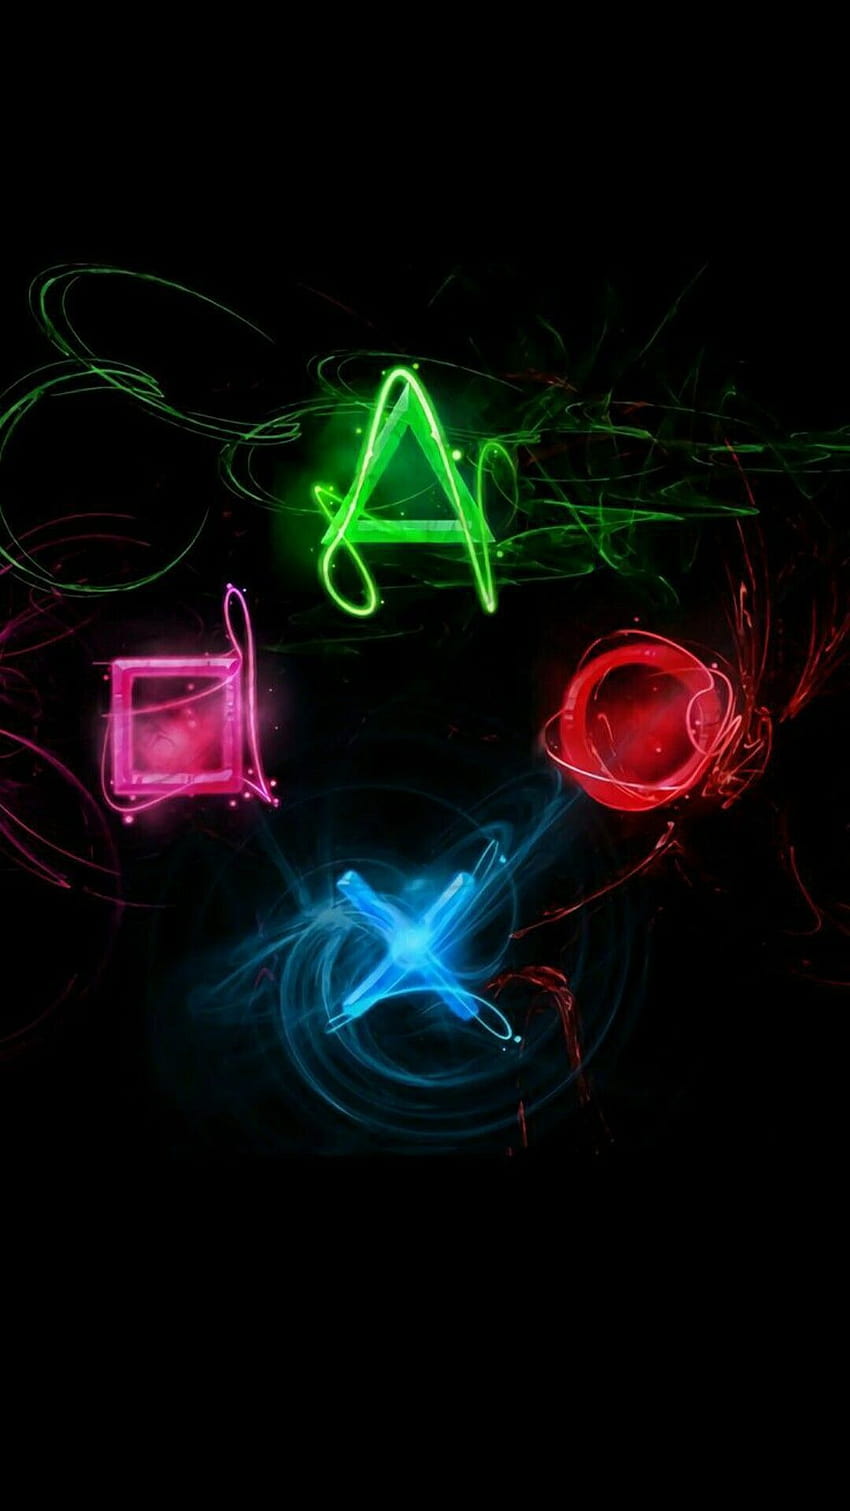 PlayStation iPhone on Dog, ps5 game iphone HD phone wallpaper